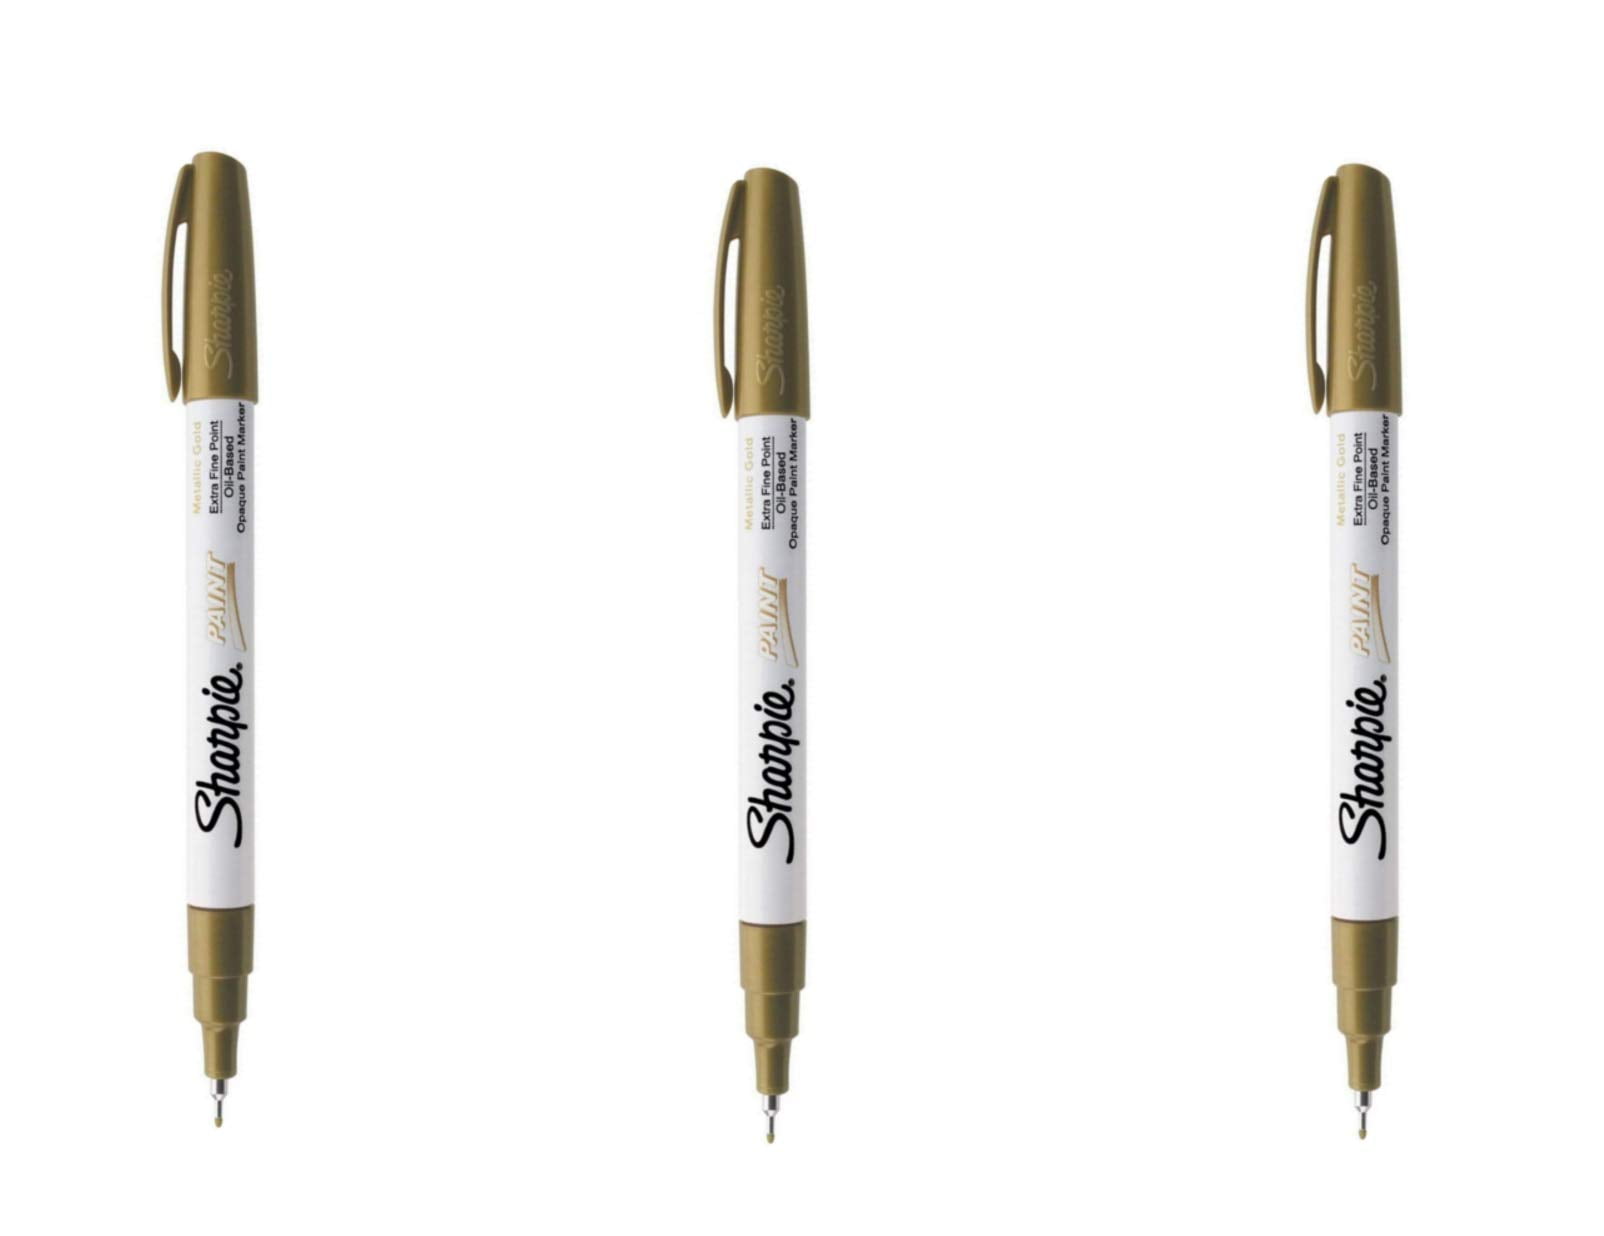 Sharpie Oil-Based Paint Marker, Extra Fine Point, Gold Ink, Pack of 3